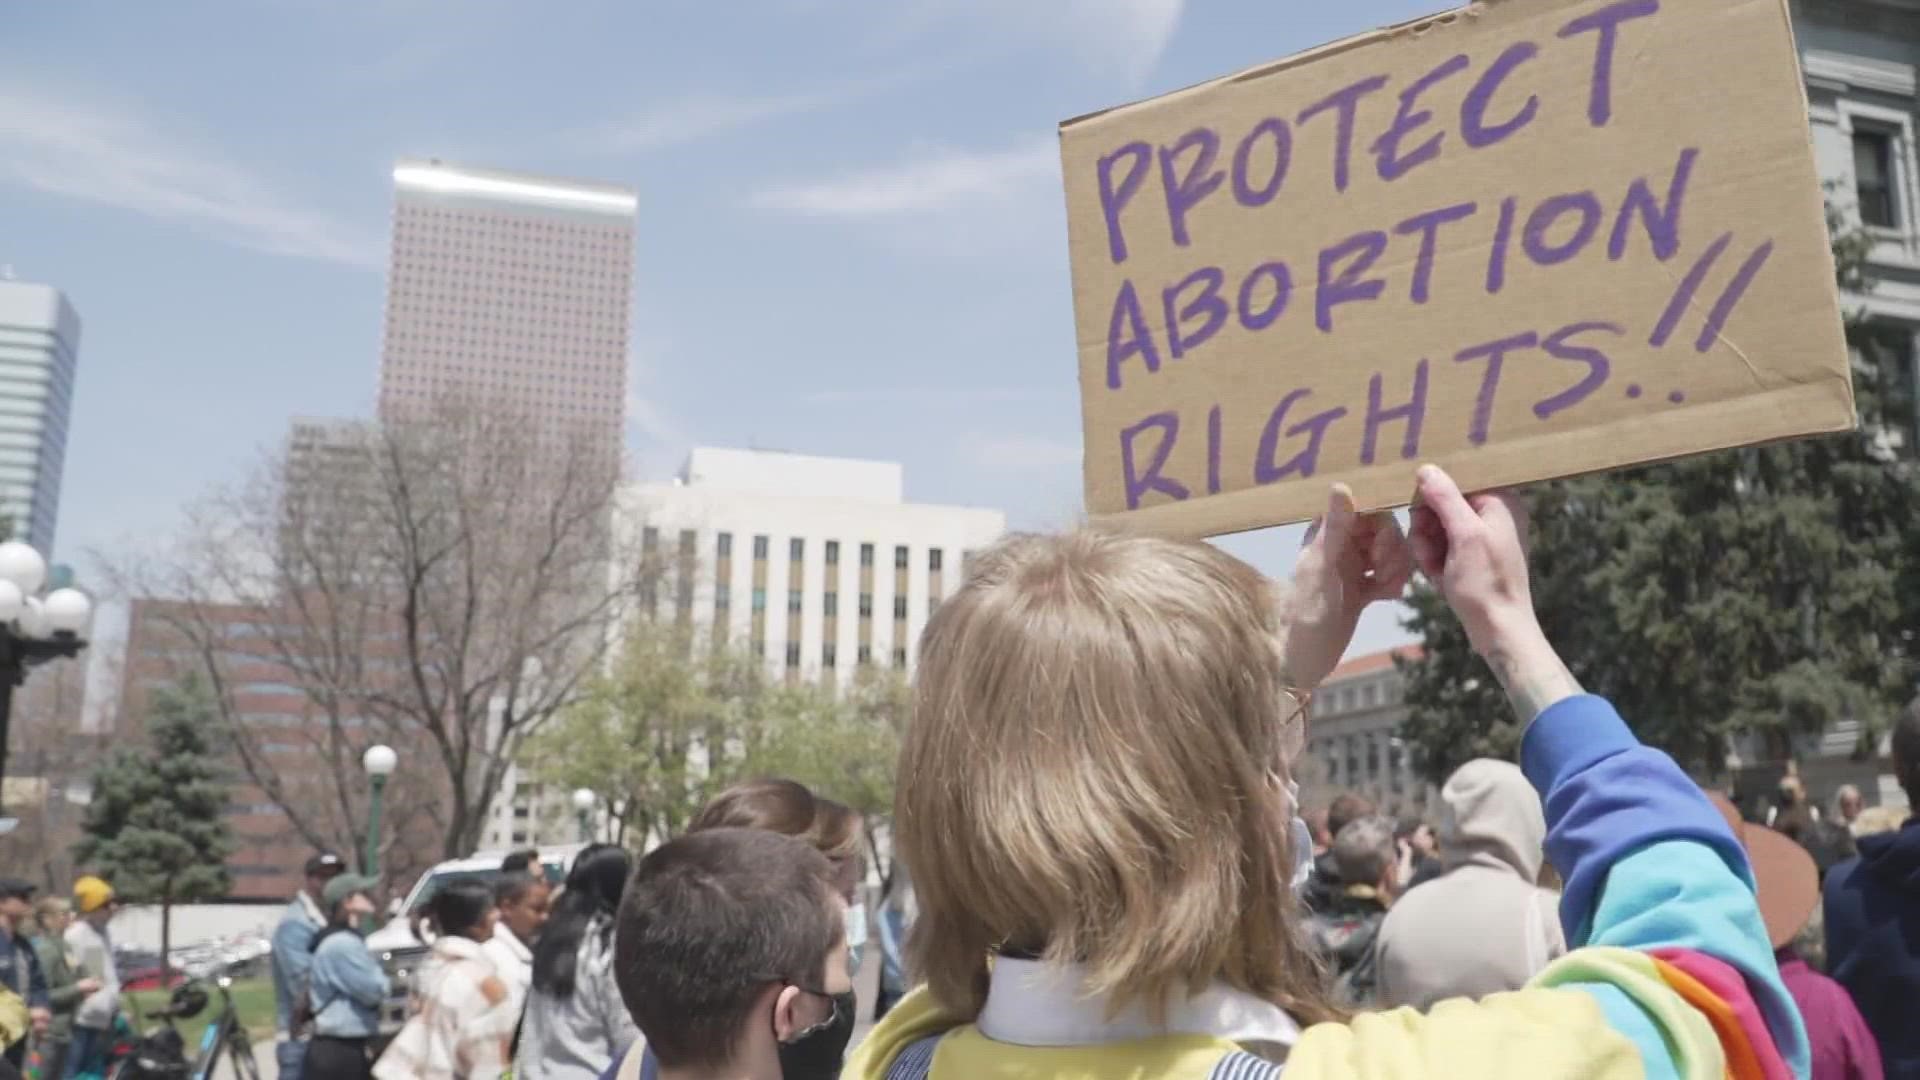 Protesters who support the right to abortion say they will keep showing up to make their voices heard.